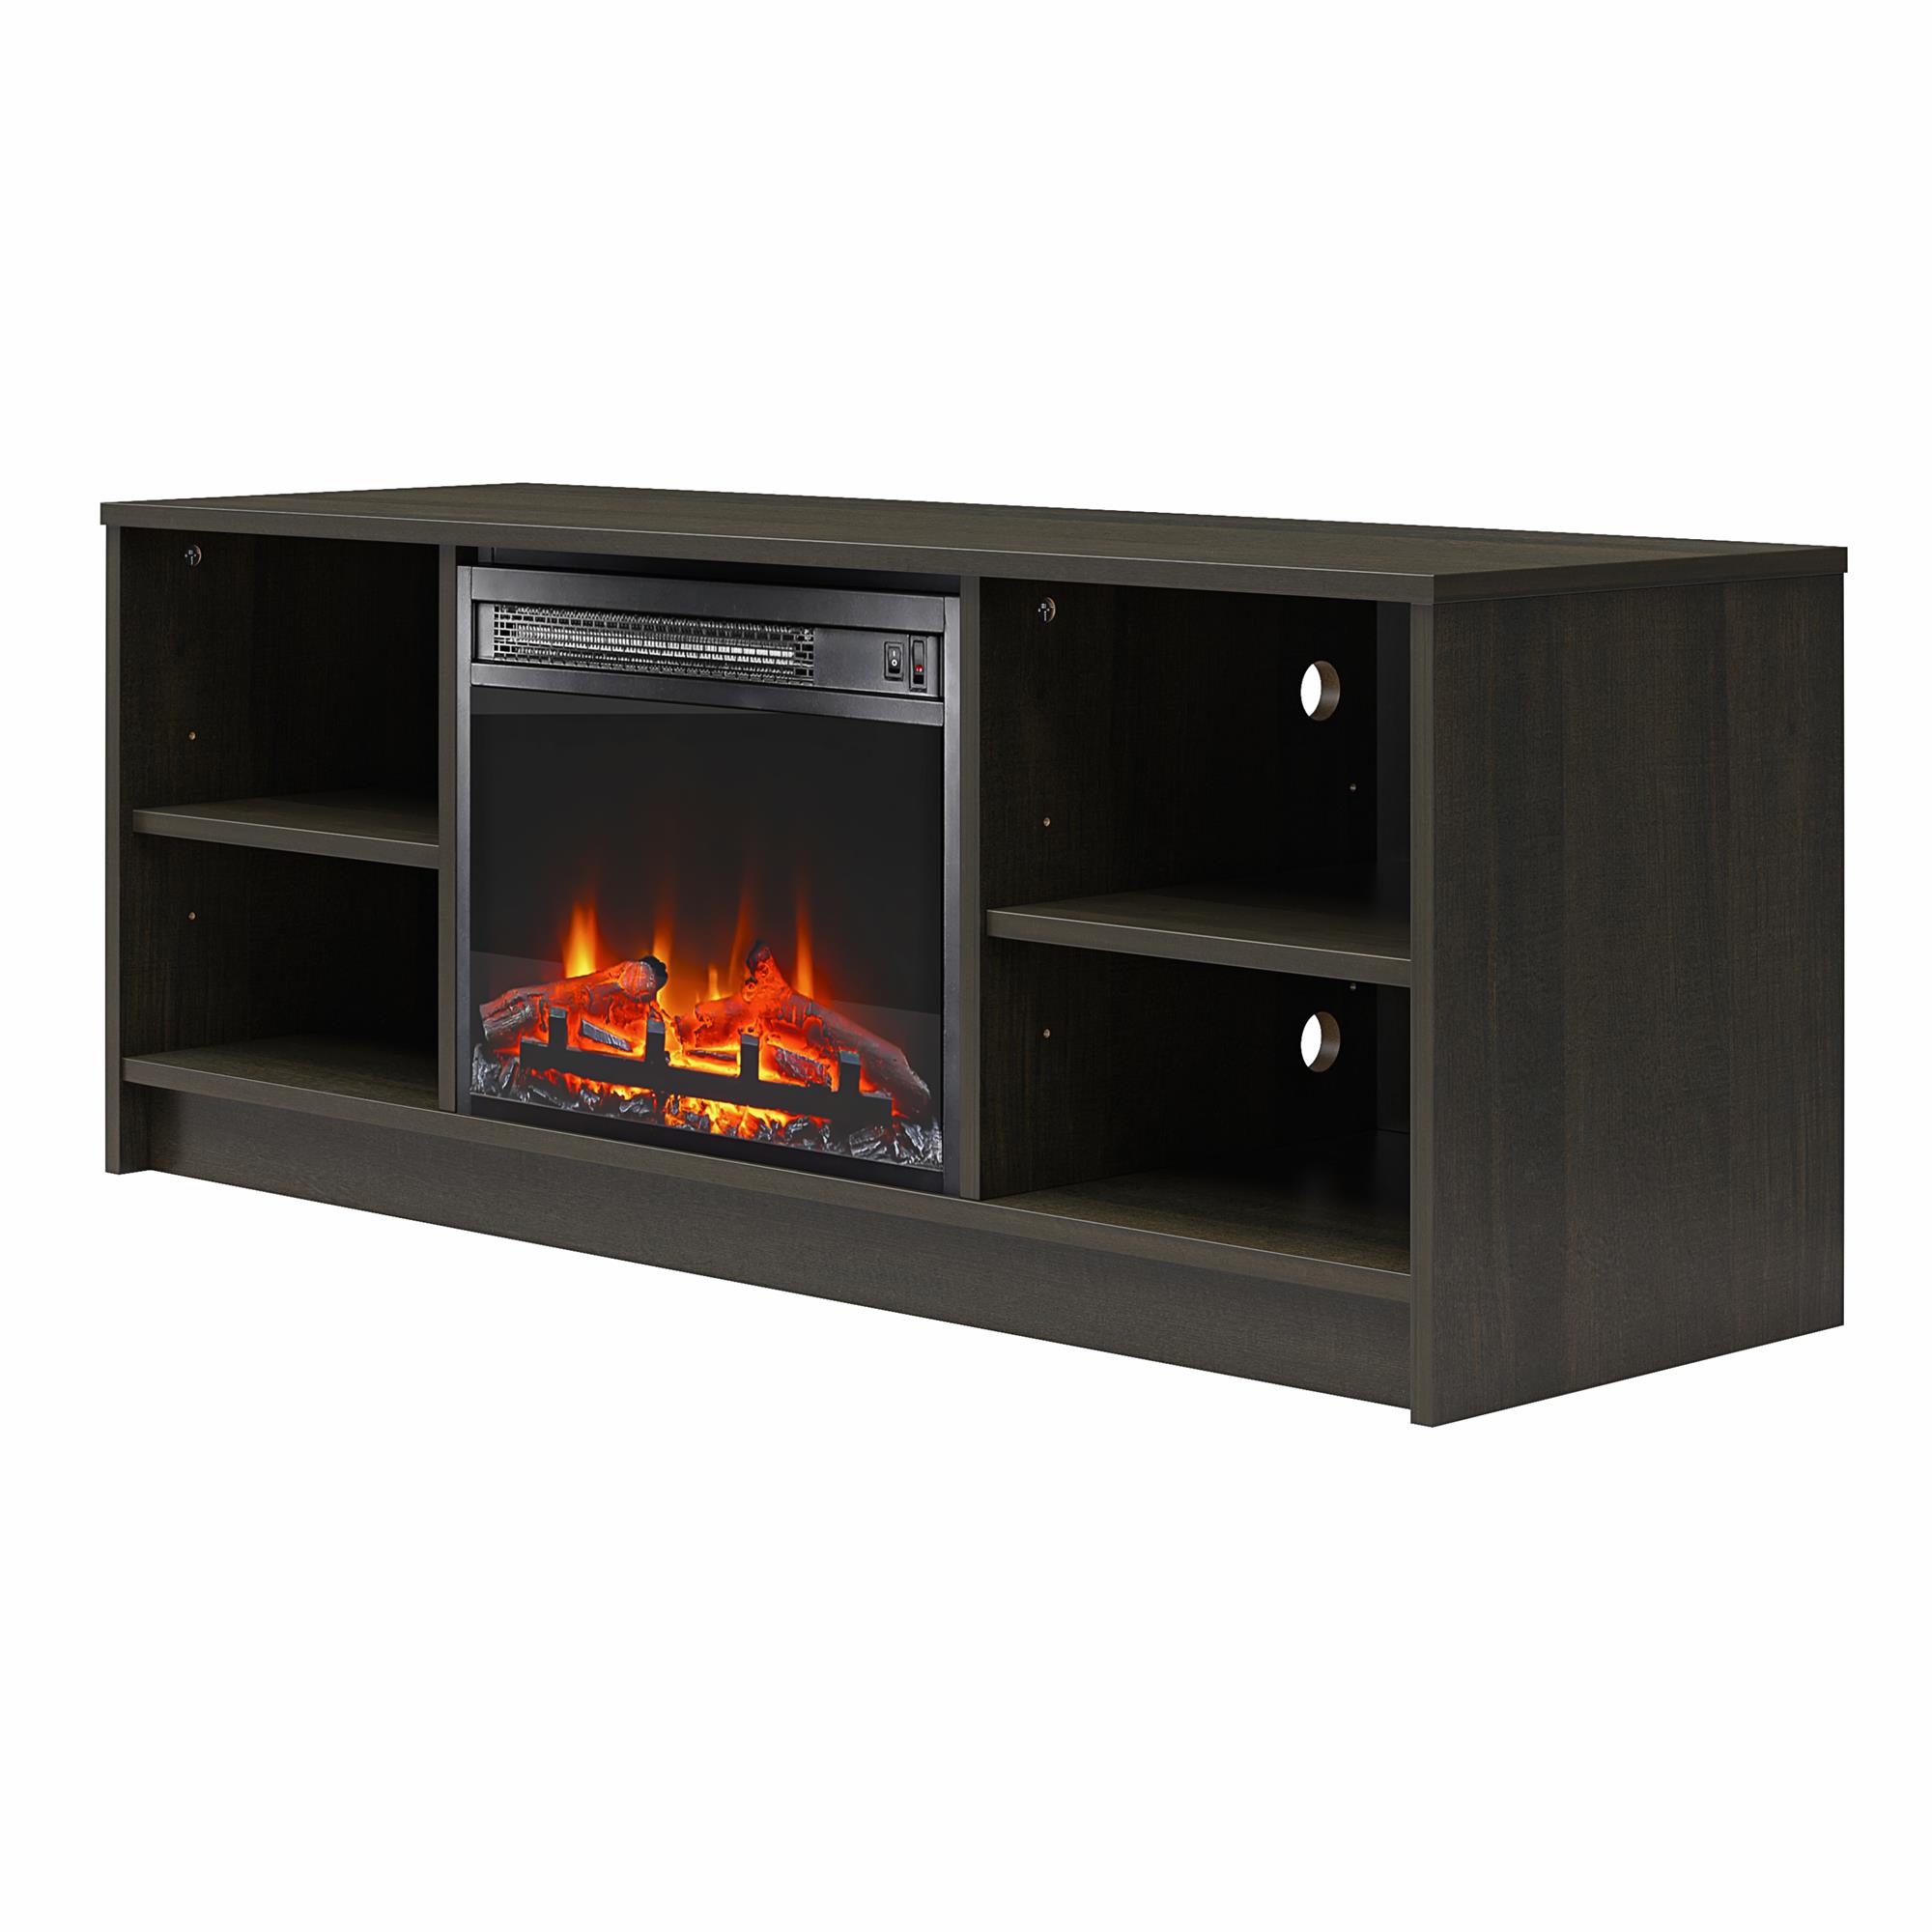 Mainstays Fireplace TV Stand, for TVs up to 55", Espresso - image 5 of 12